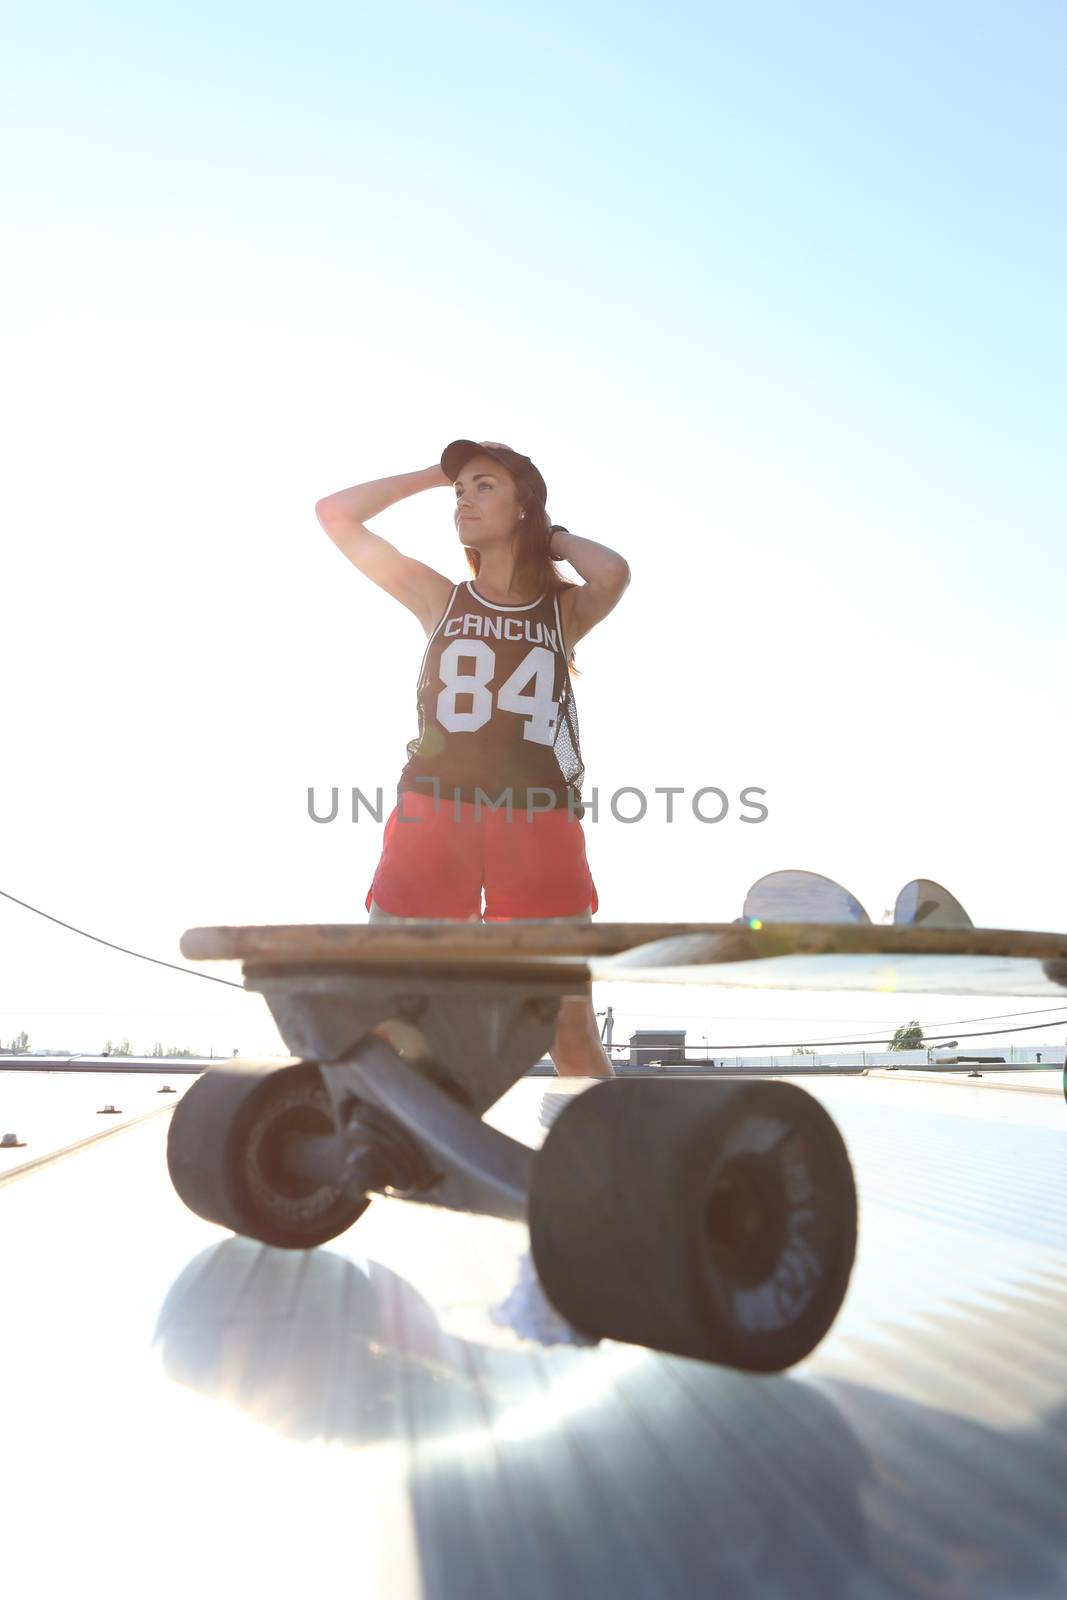 skatepark, the girl with the board by robert_przybysz